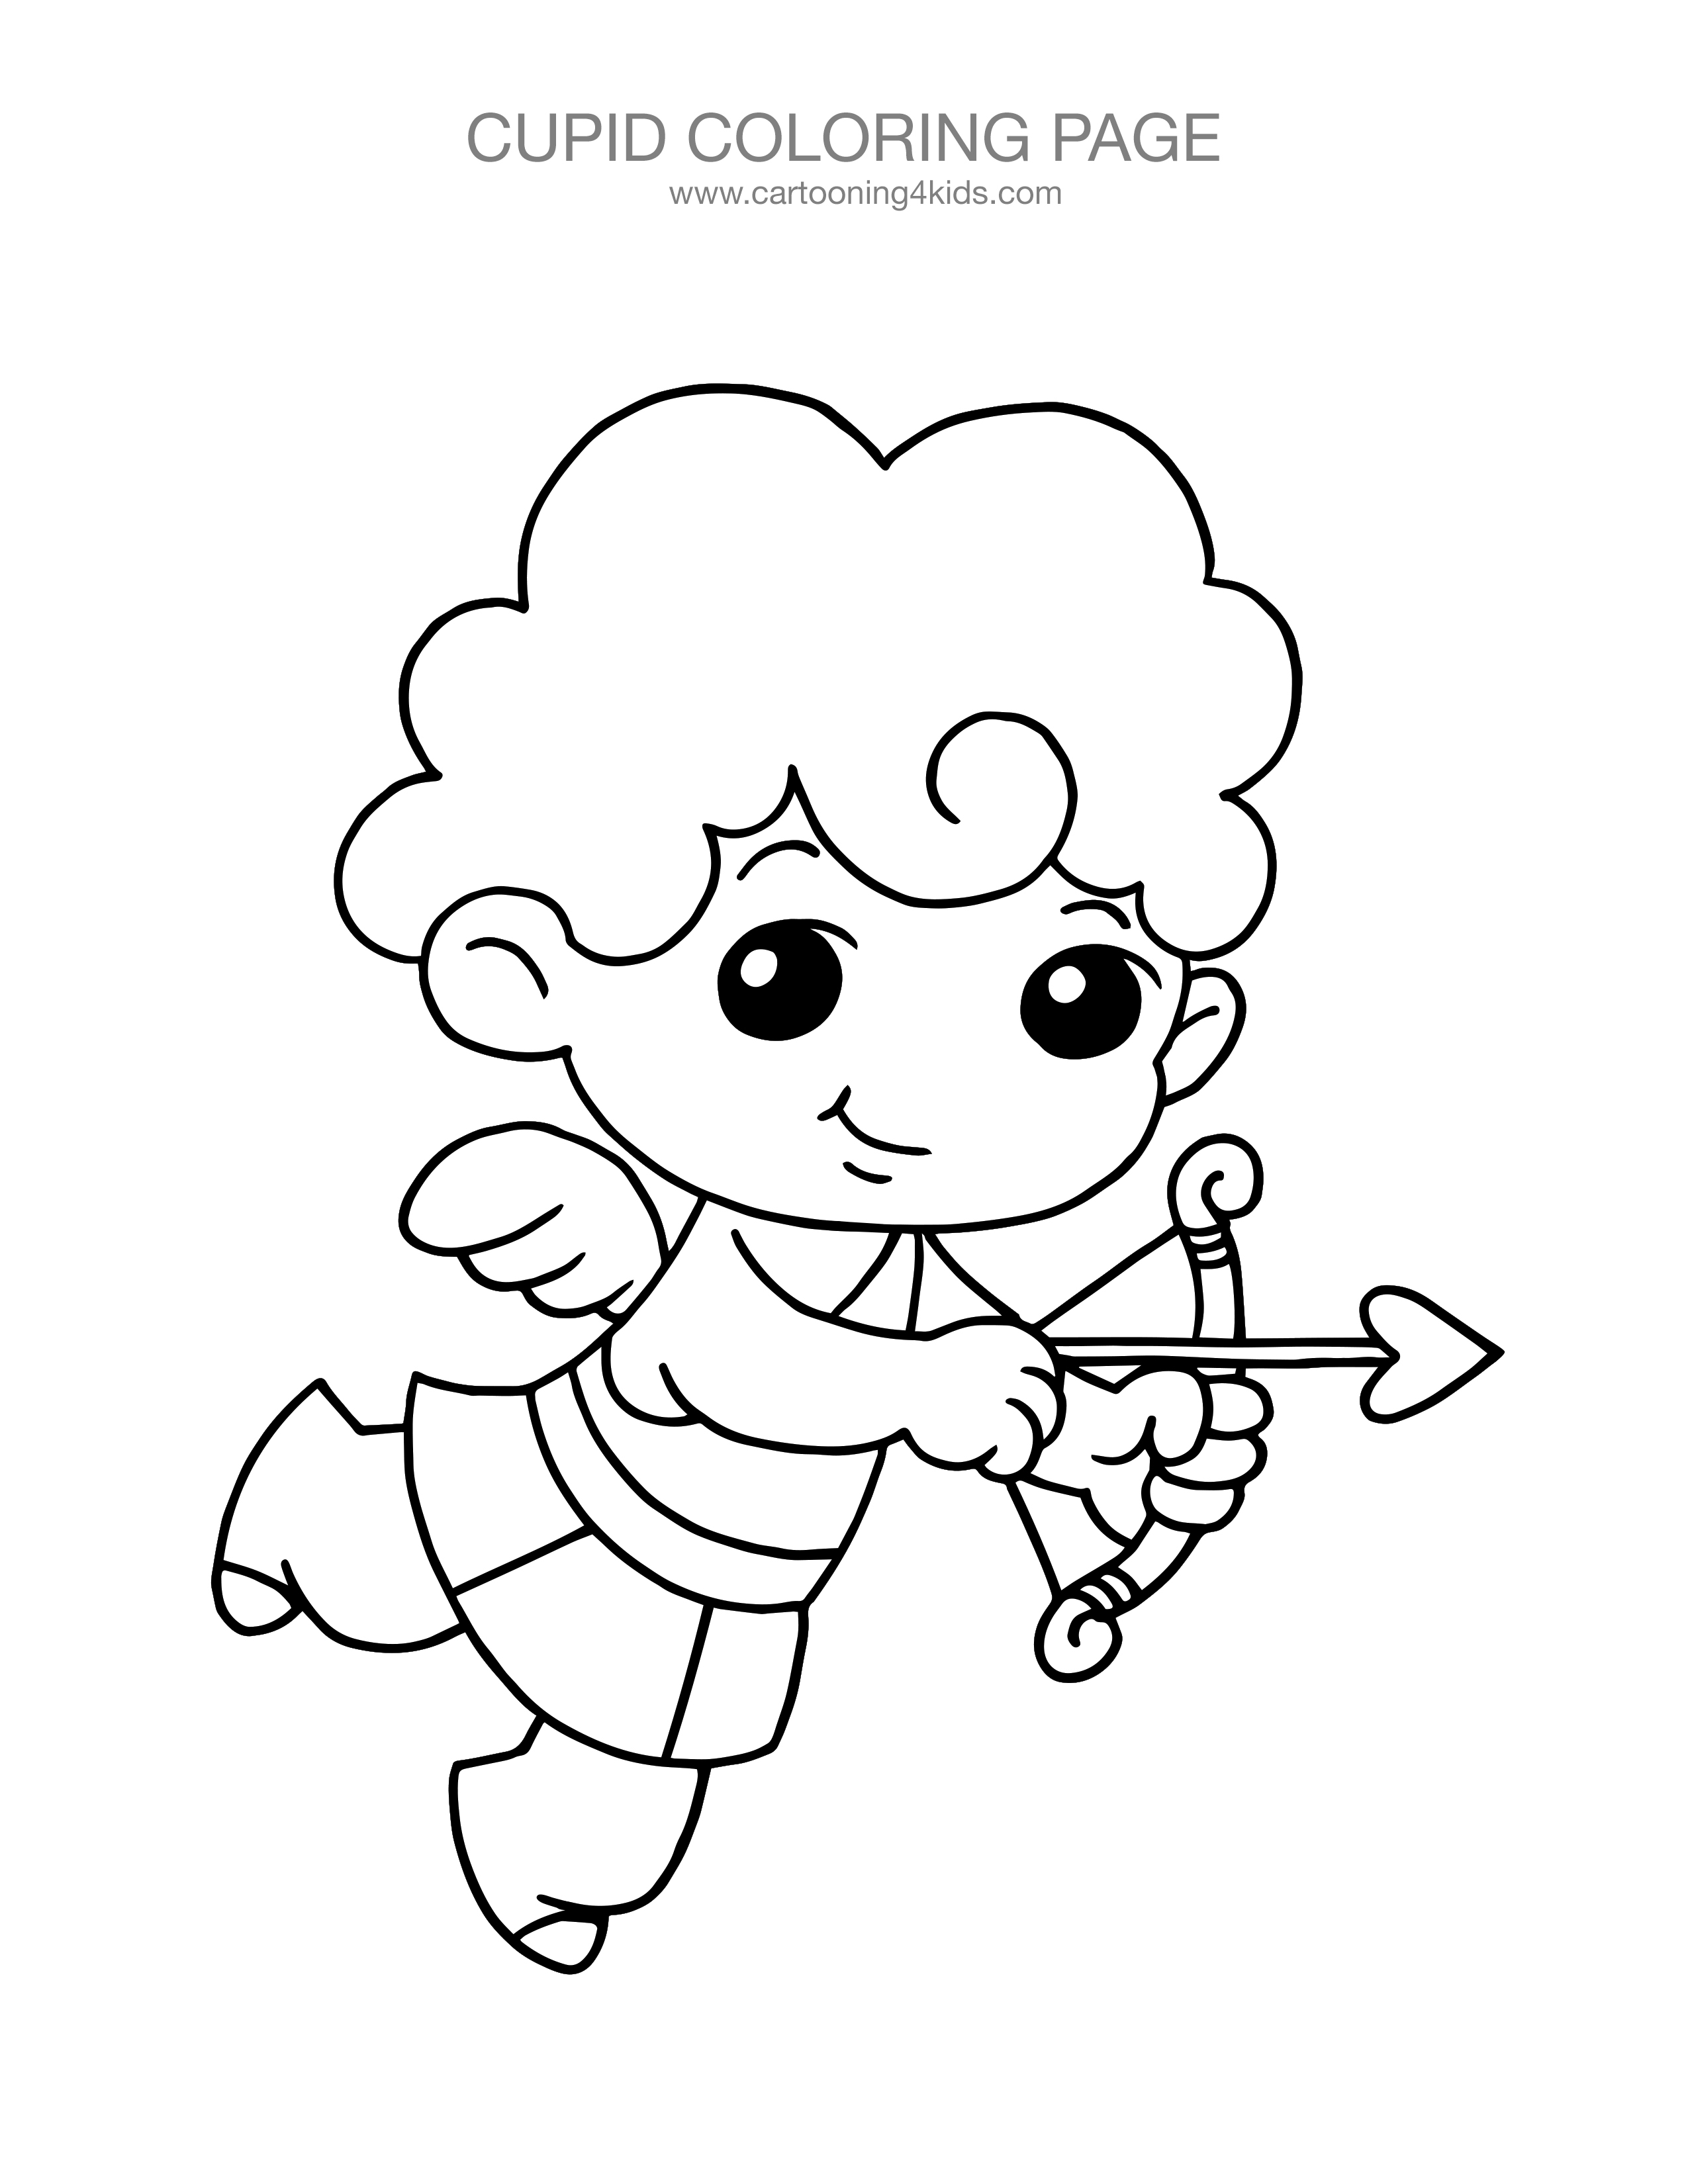 Cupid Coloring Pages Printable at GetColorings.com | Free printable